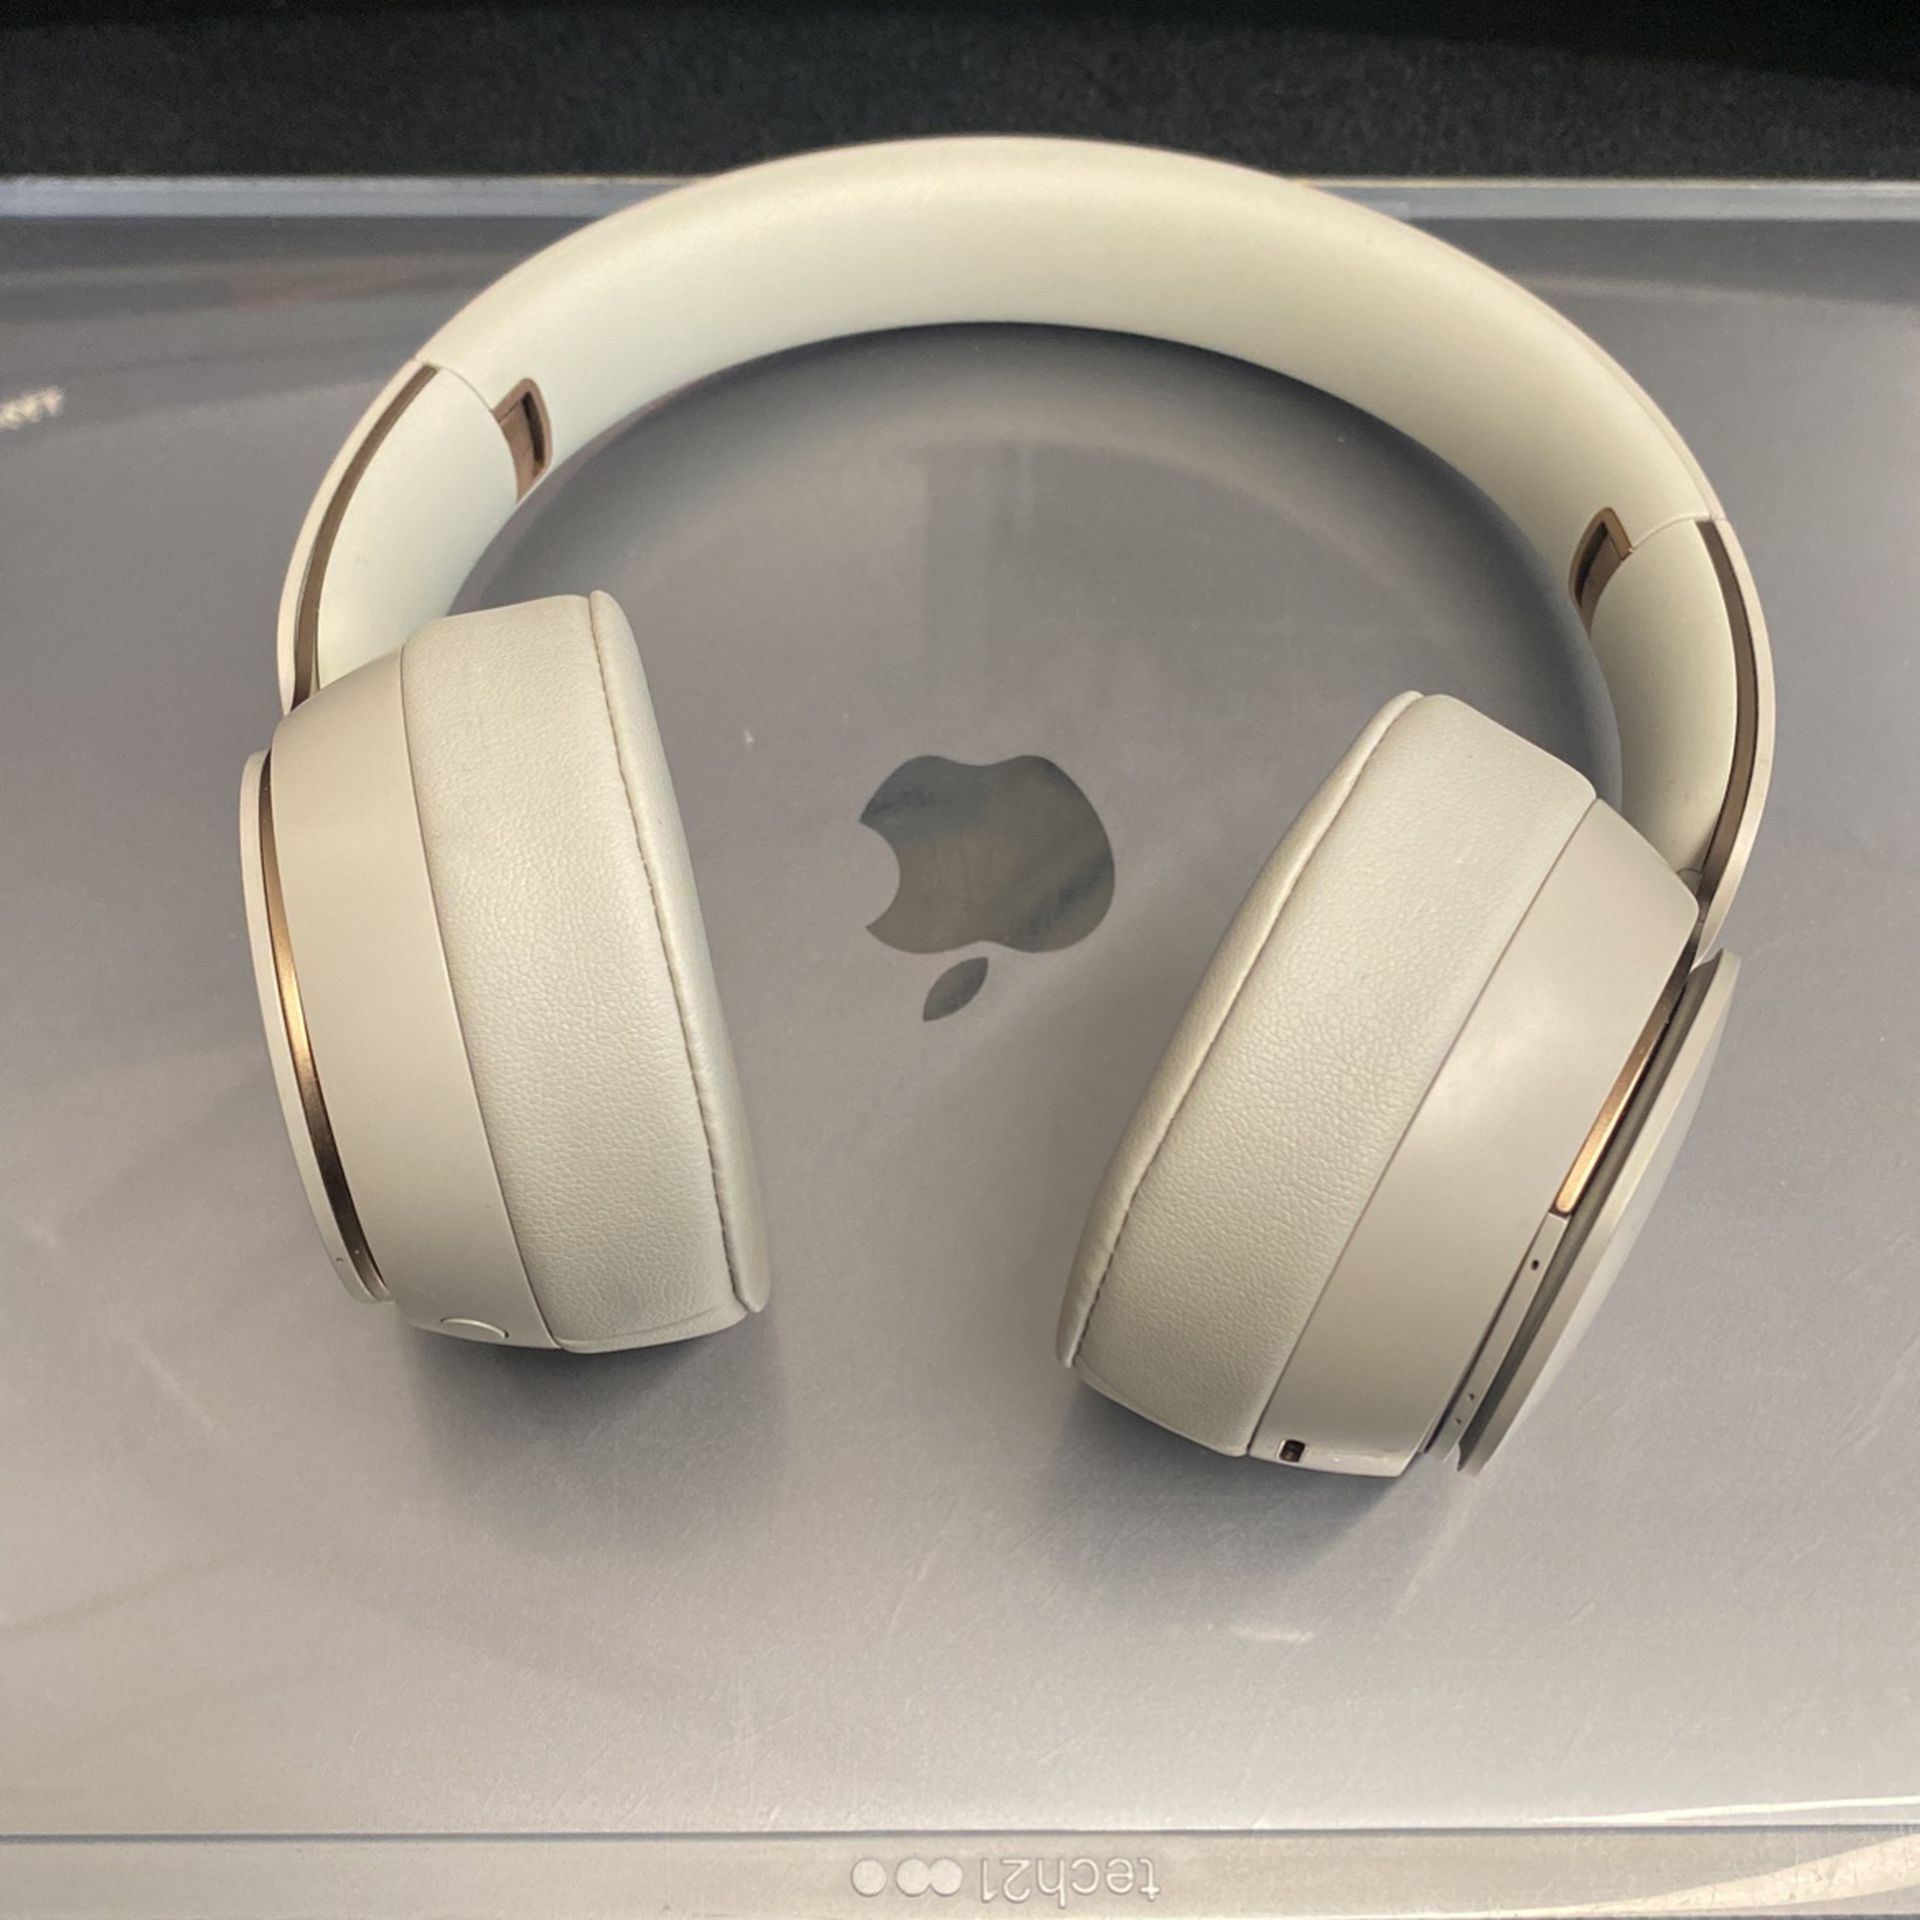 Beats Solo Pro Wireless Noise Cancelling On-Ear Headphones with Apple H1 Headphone Chip - Gray